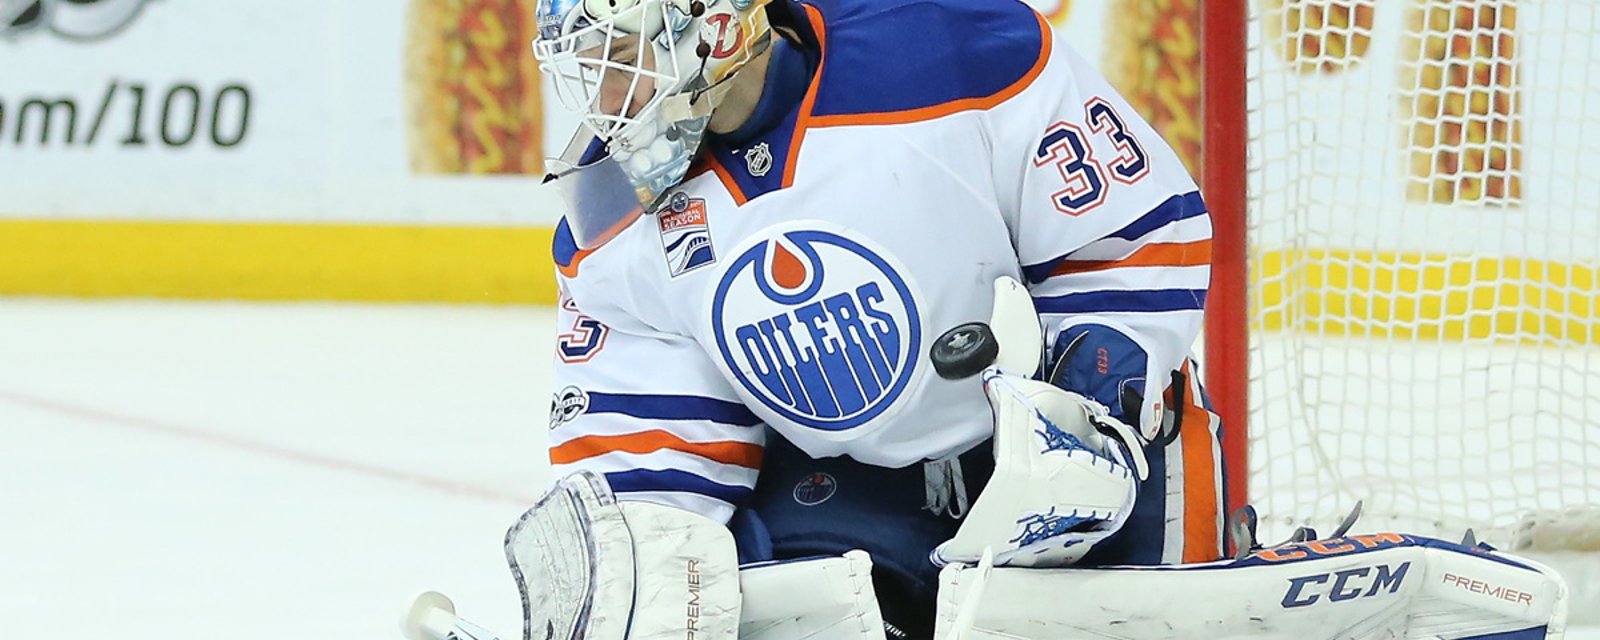 Report: Cam Talbot was prepared to win the Stanley Cup